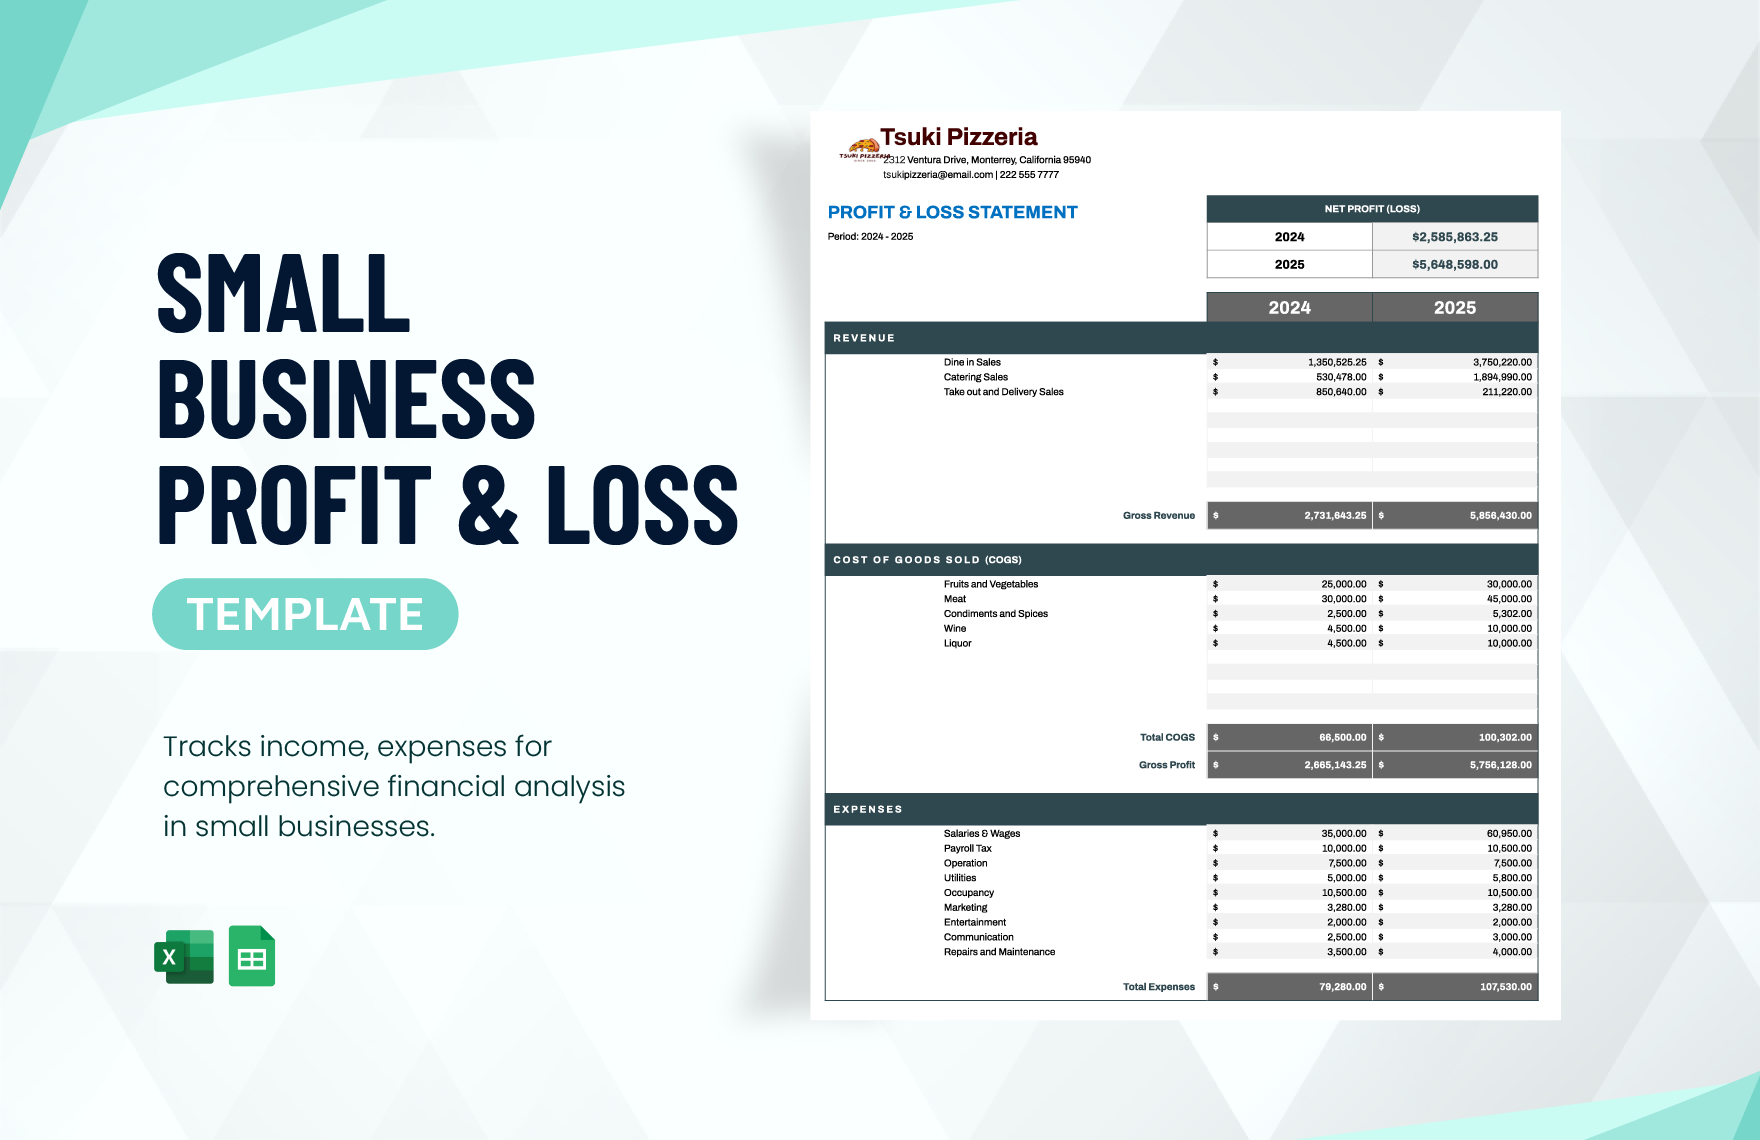 Small Business Profit And Loss Template